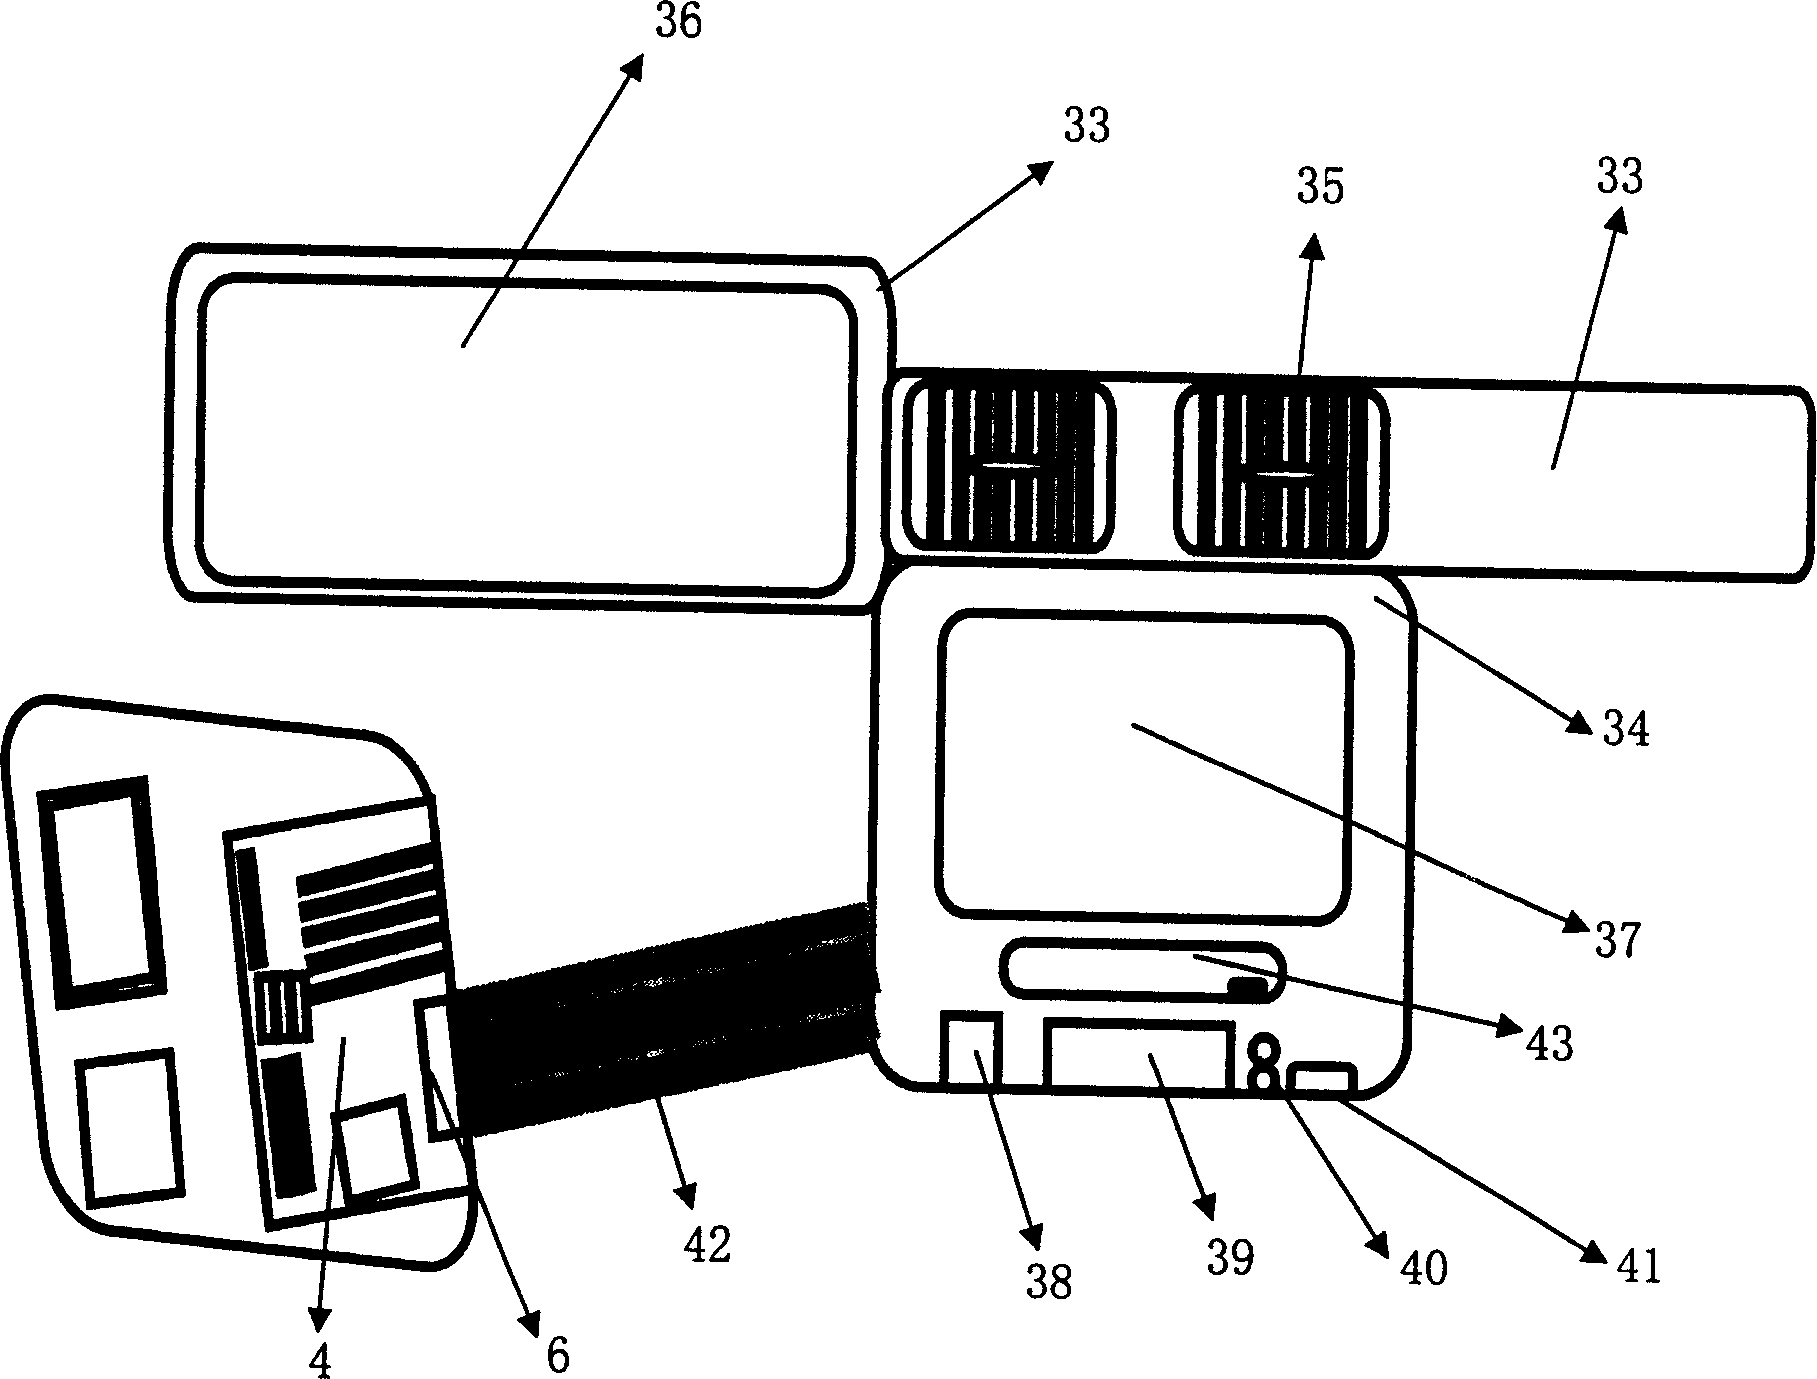 Vehicle-mounted computer system